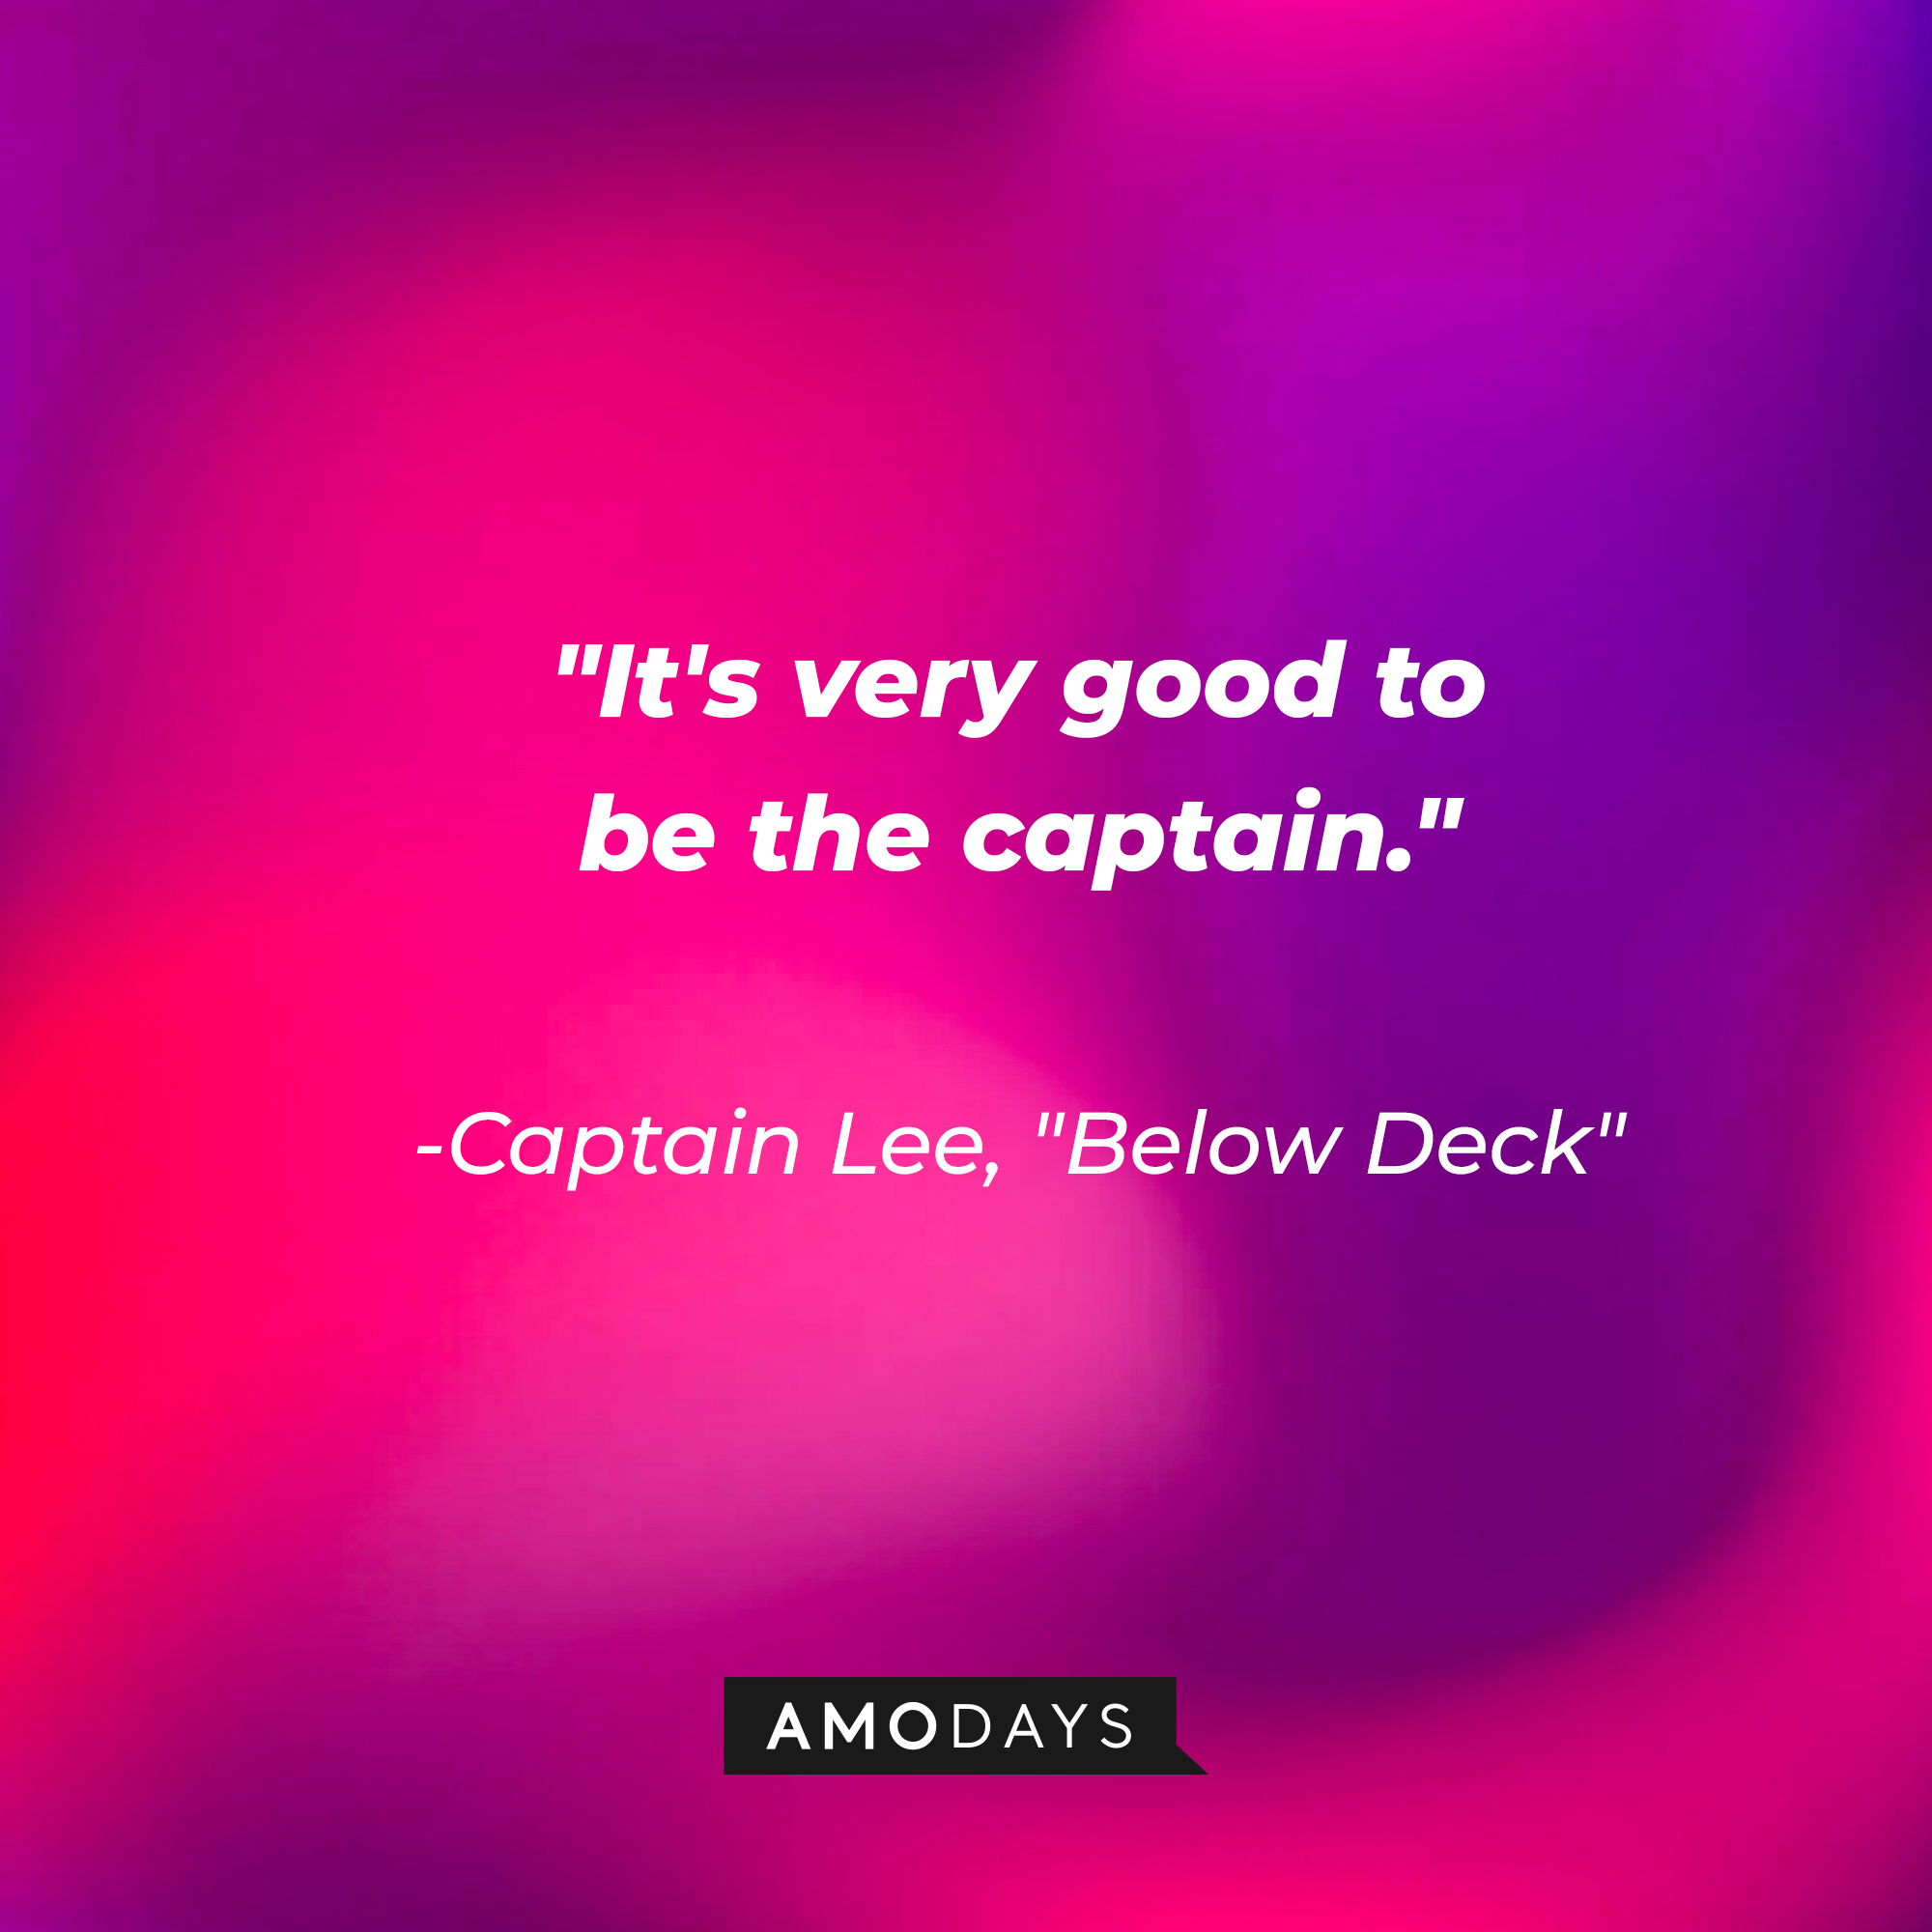 Captain Lee's quote from "Below Deck:" "It's very good to be the captain."  | Source: AmoDays